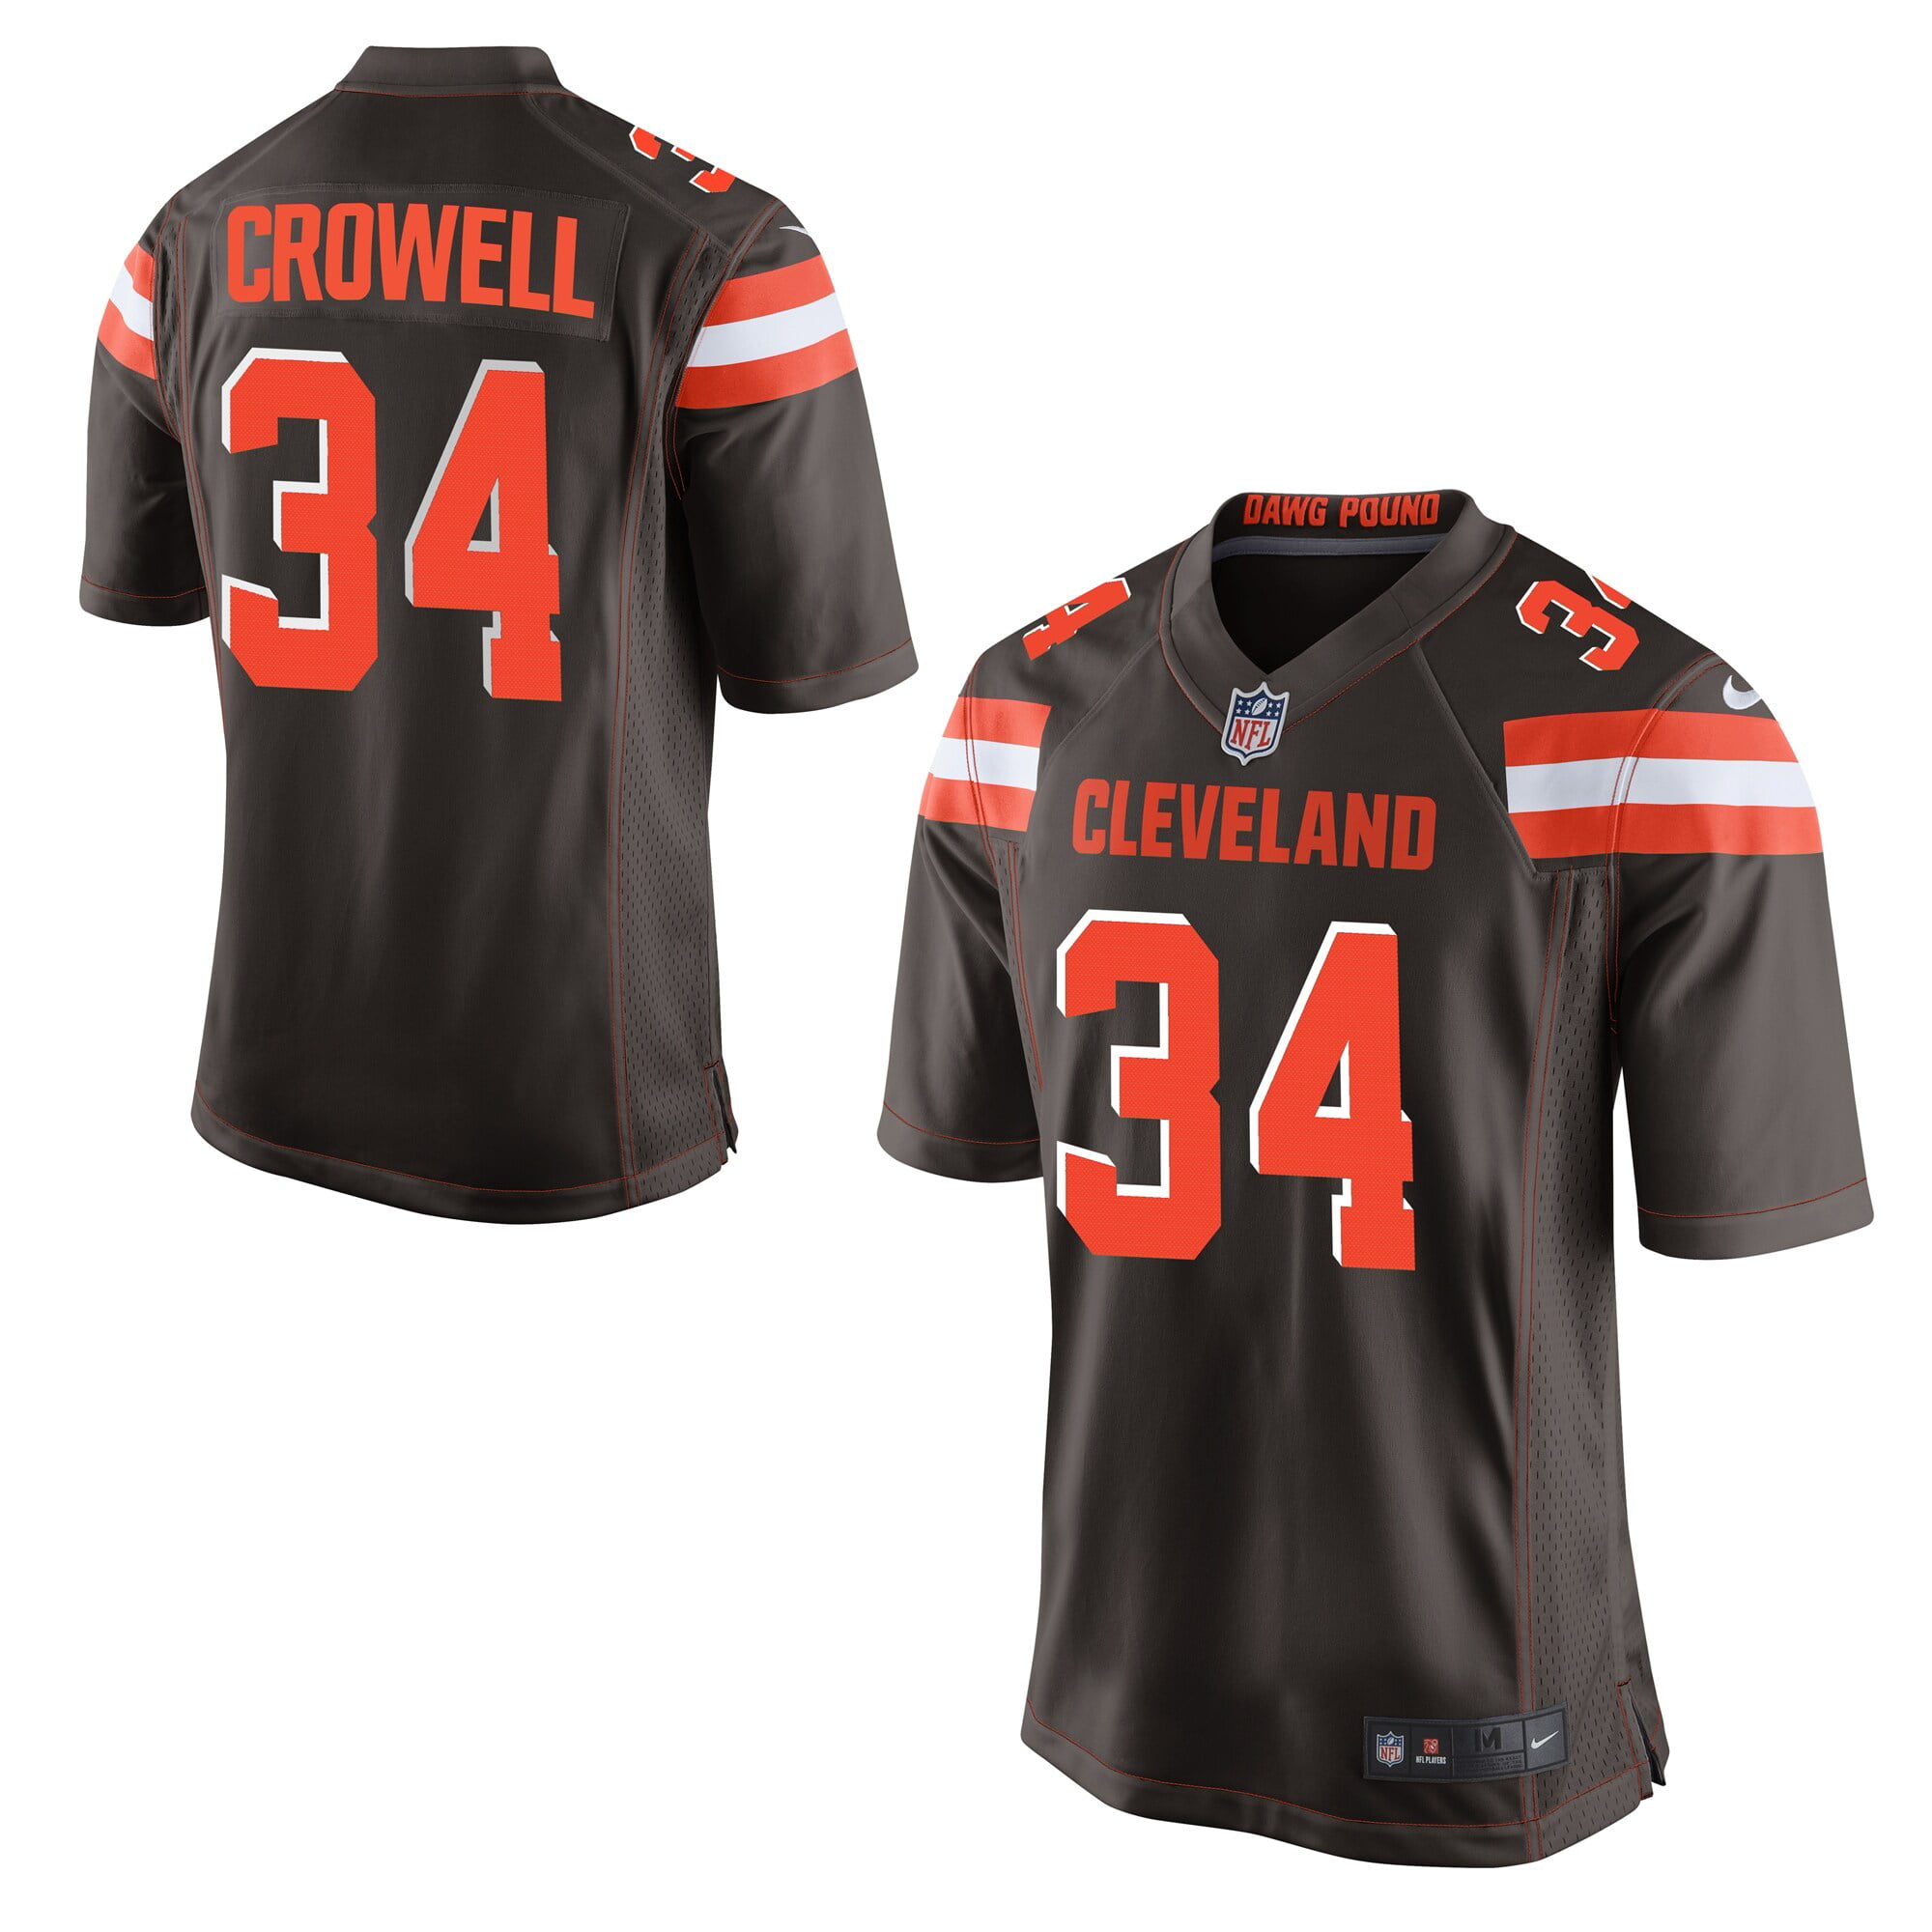 Isaiah Crowell Cleveland Browns Nike Game Jersey - Brown - Walmart ...